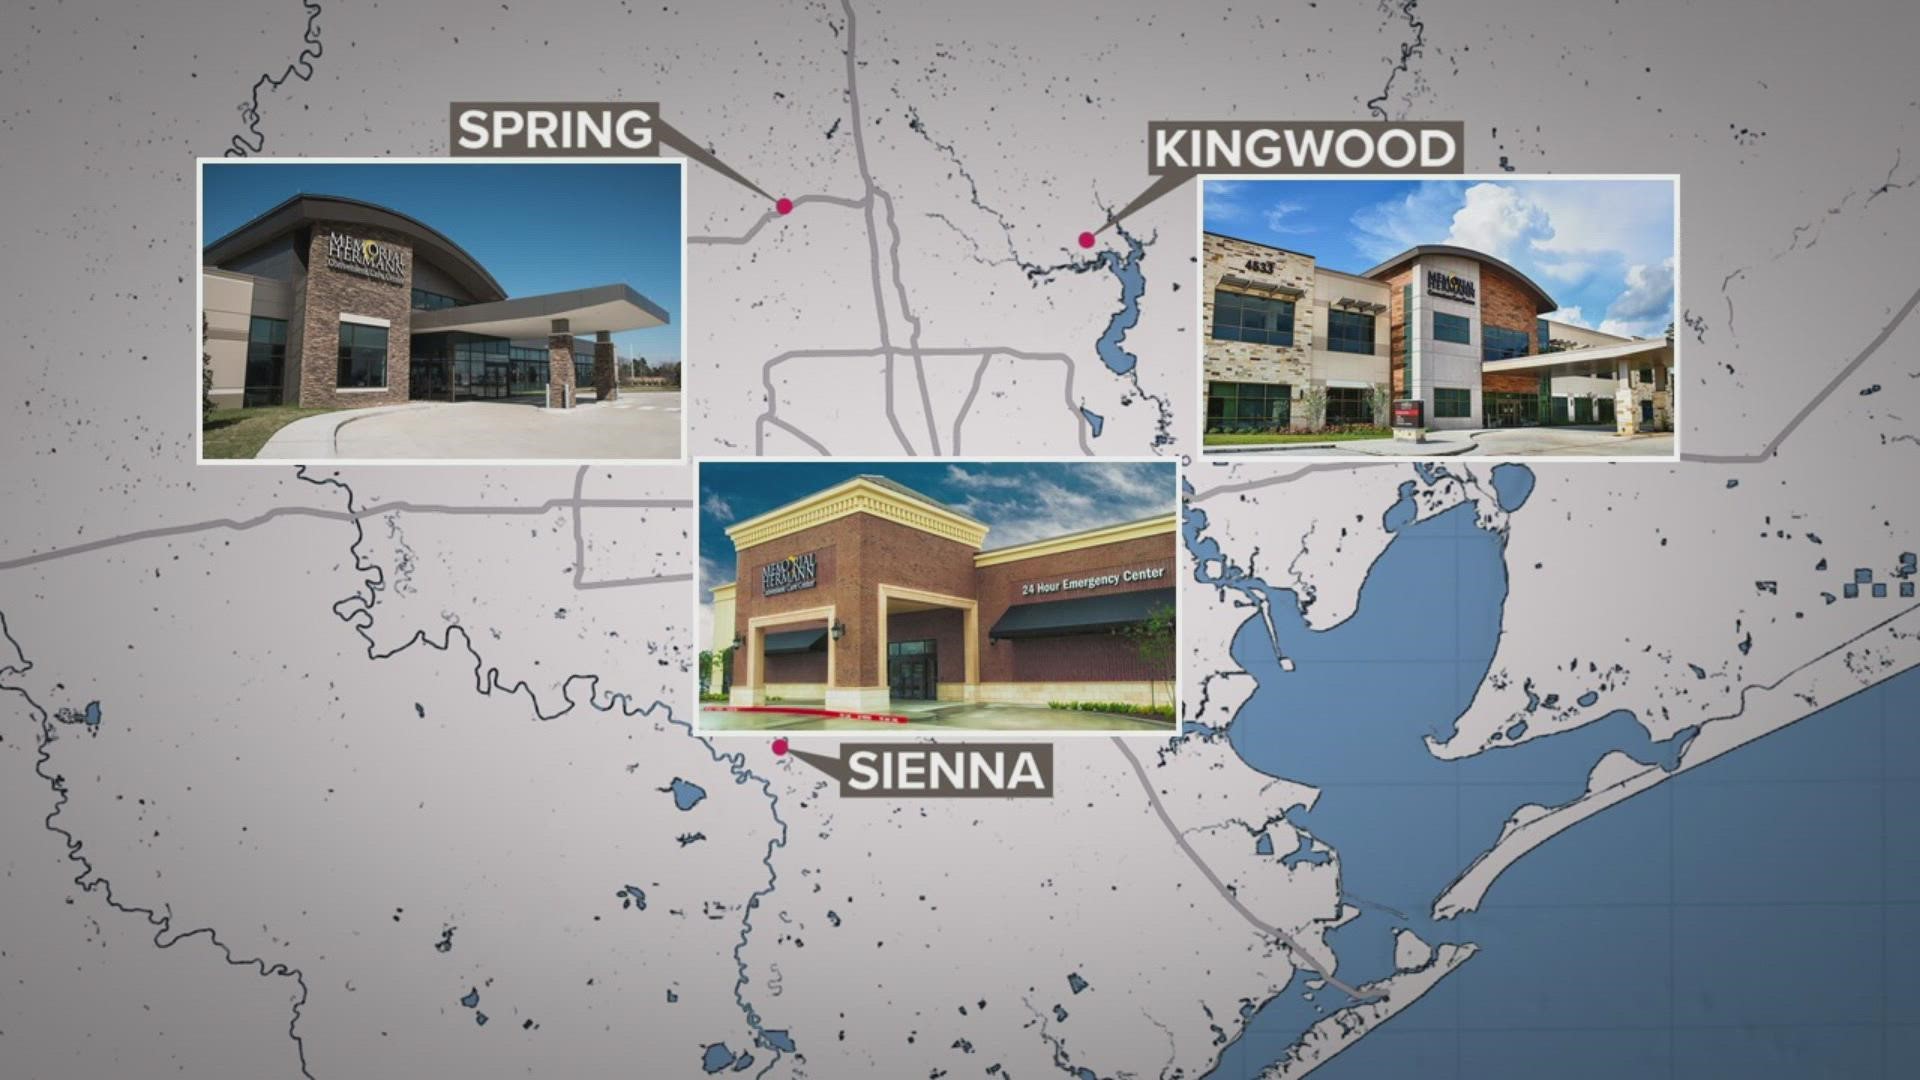 Memorial Hermann said emergency rooms in Kingwood, Spring and Sienna will close due to "continued COVID-19 surge and its ongoing impact to our system's operations."